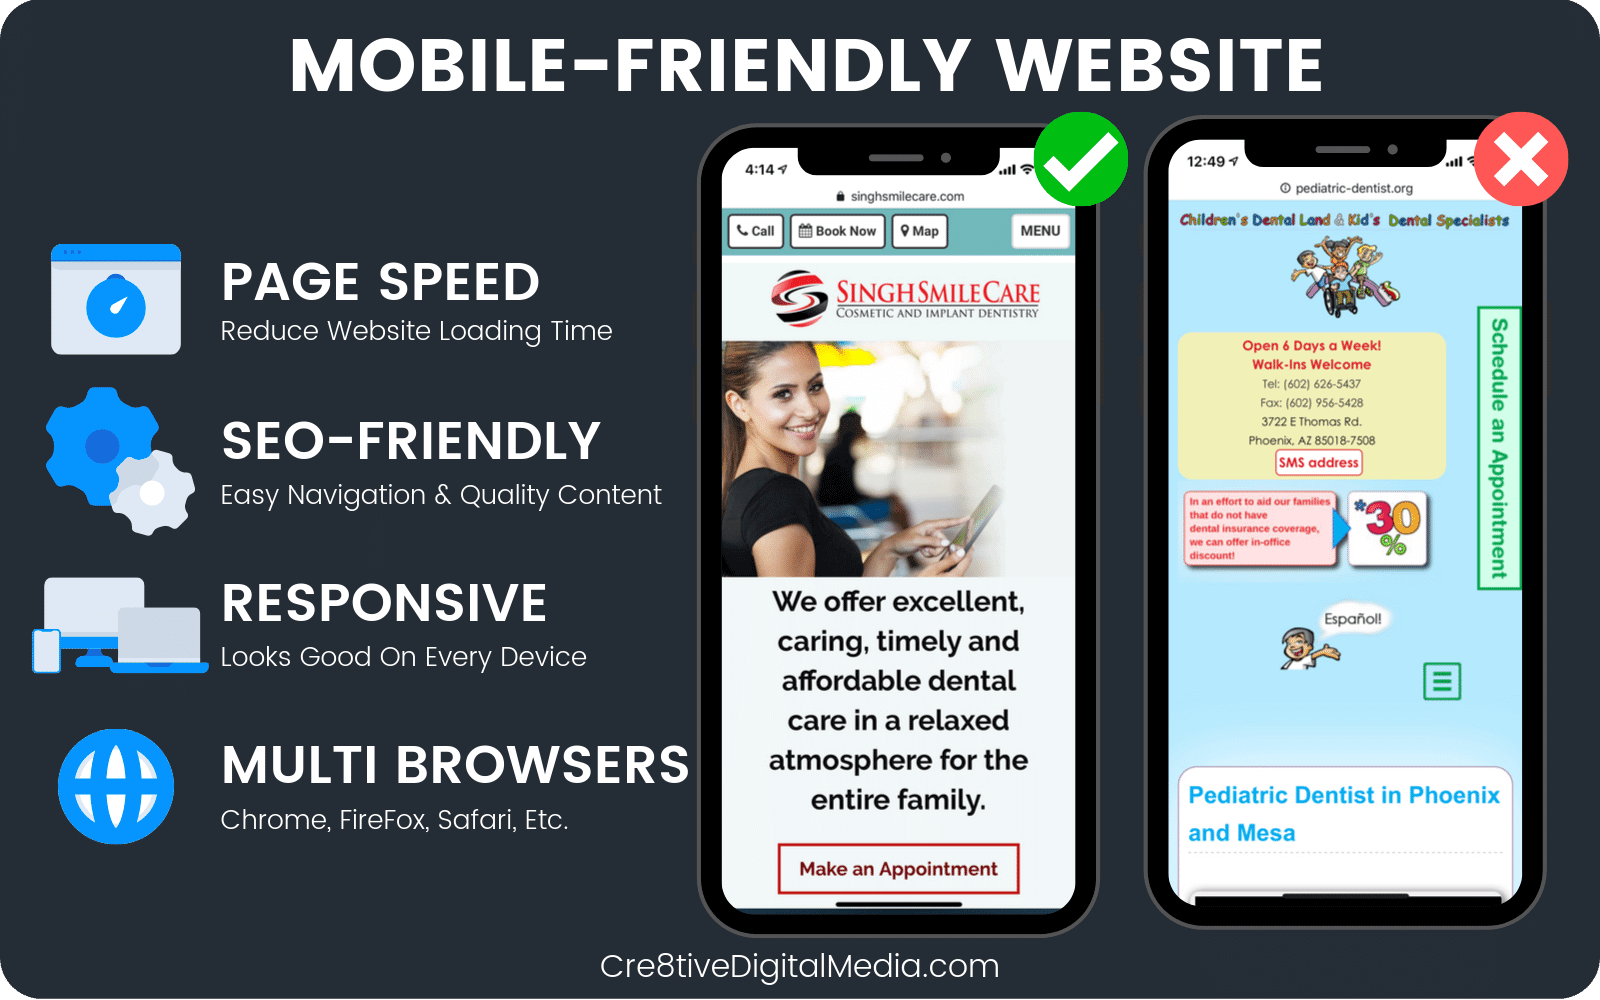 Mobile-Friendly Website offers a better user experience